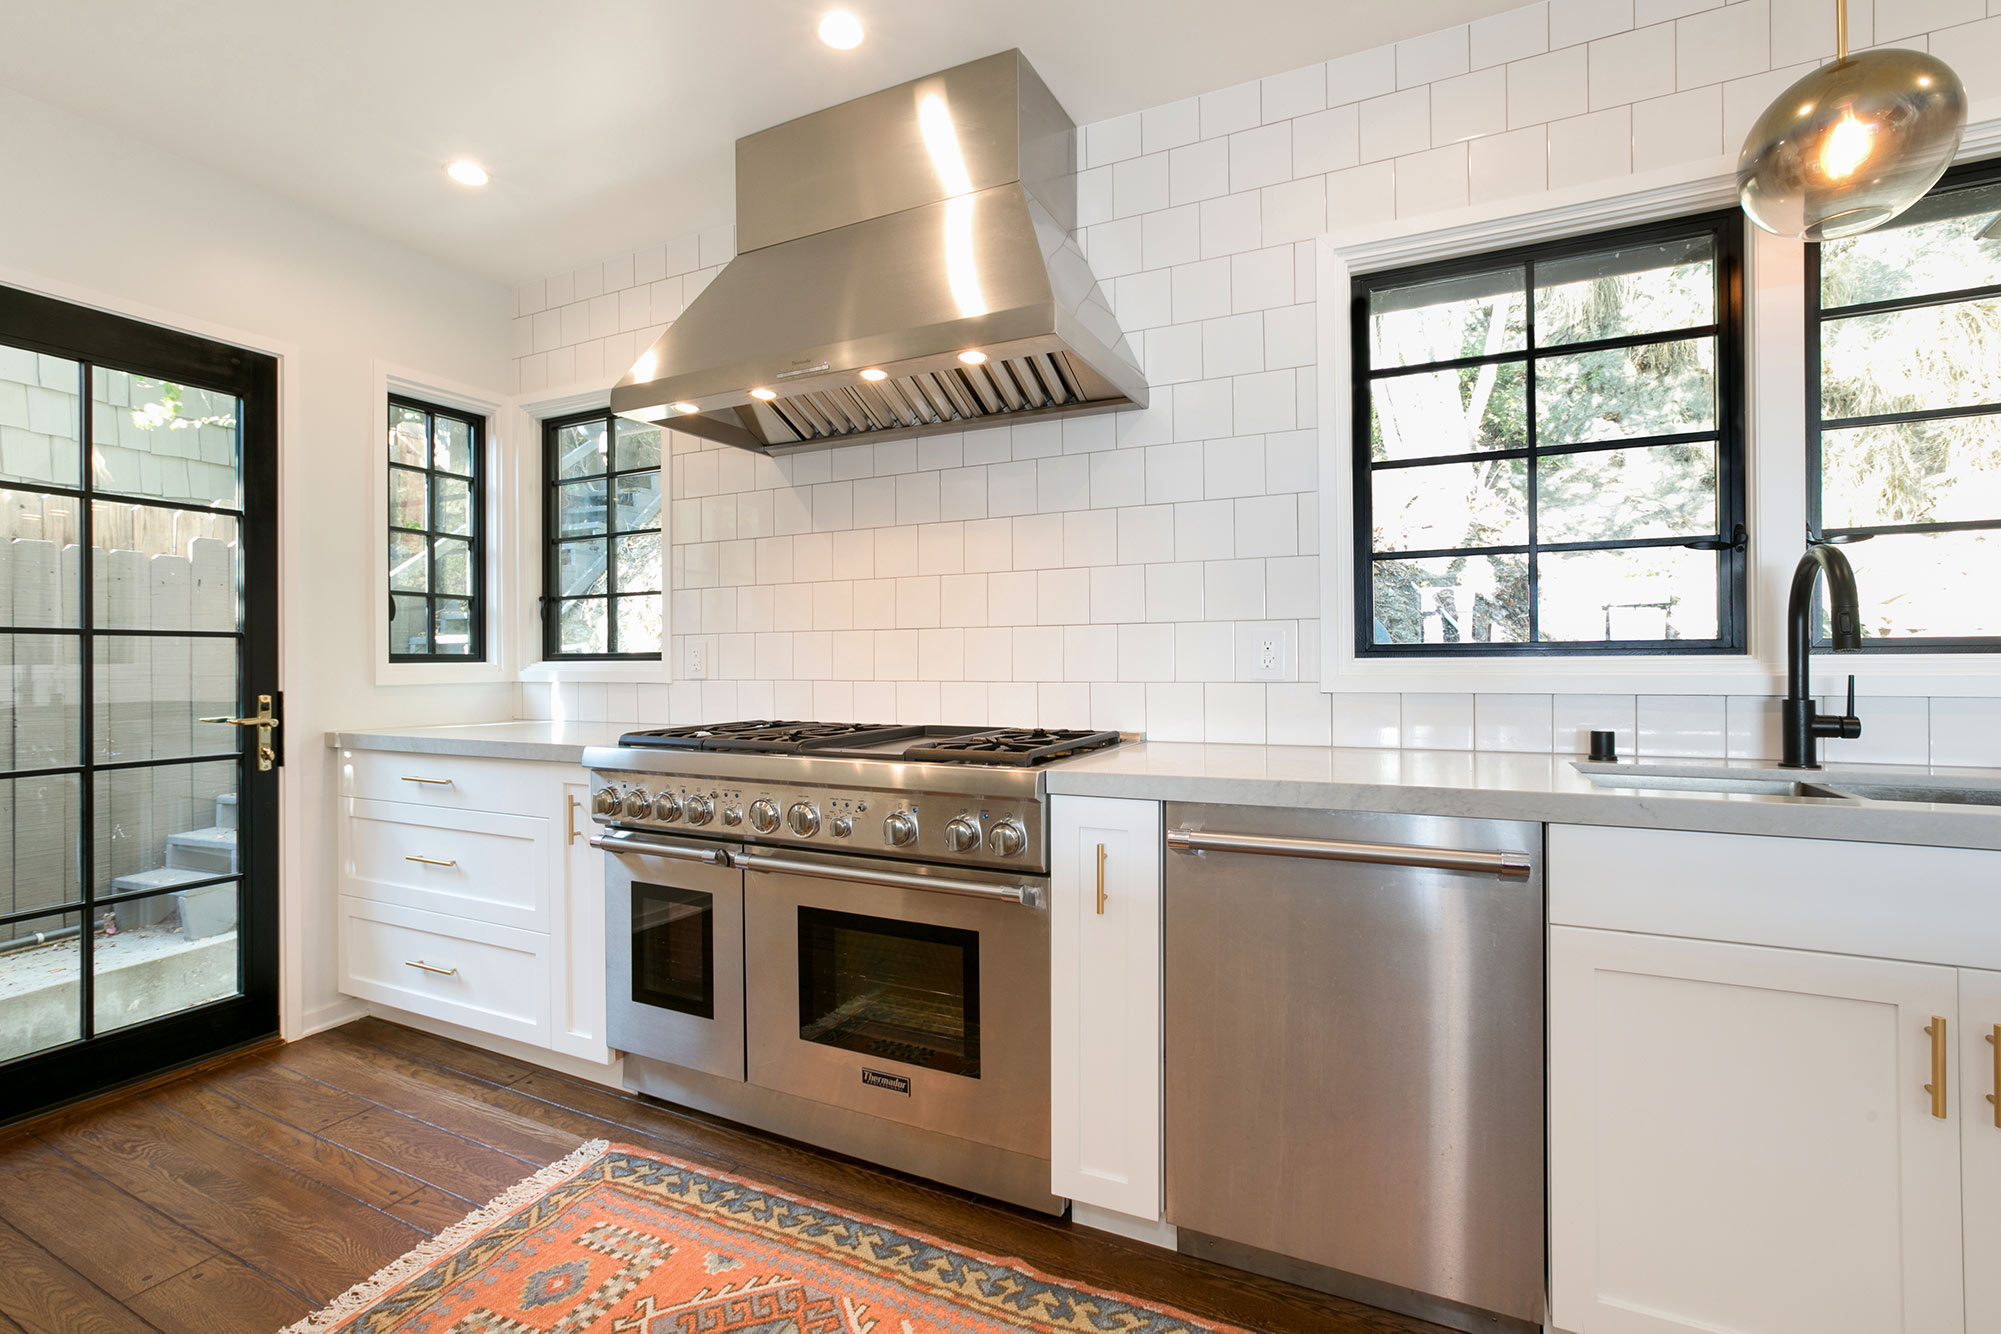  The new open kitchen features custom-made white shaker cabinets with gold pulls and knobs, black fixtures, new hardwood floors, white 5"X5" ceramic tile backsplash, Caesarstone Noble Grey countertops, breakfast bar with pattern cement tile detail, T